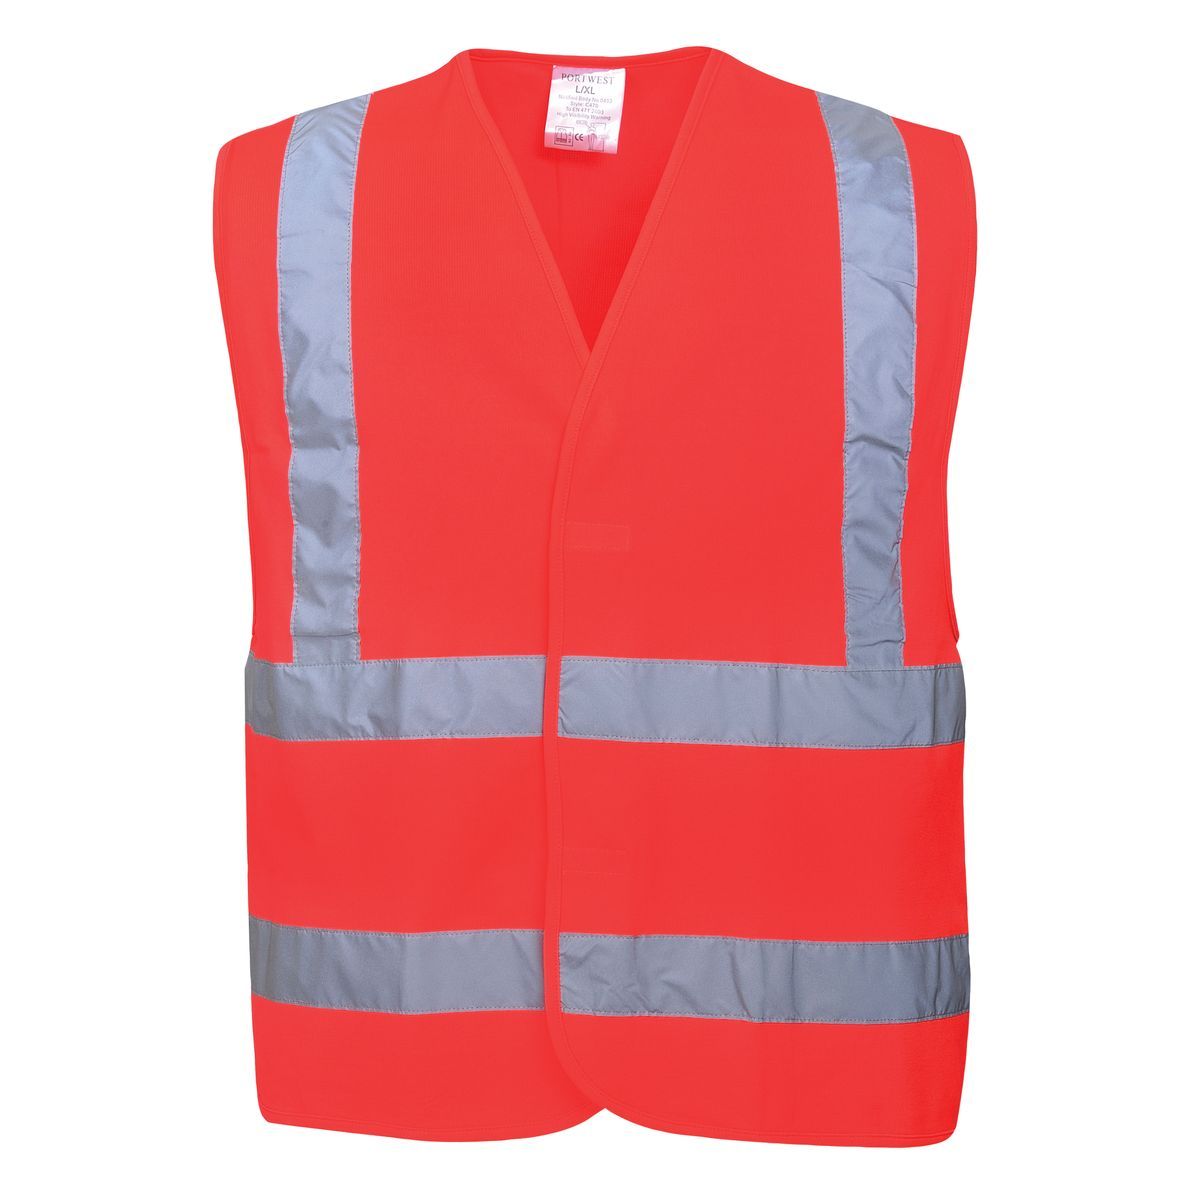 Style C470 HiVis Band and Brace Vest-2